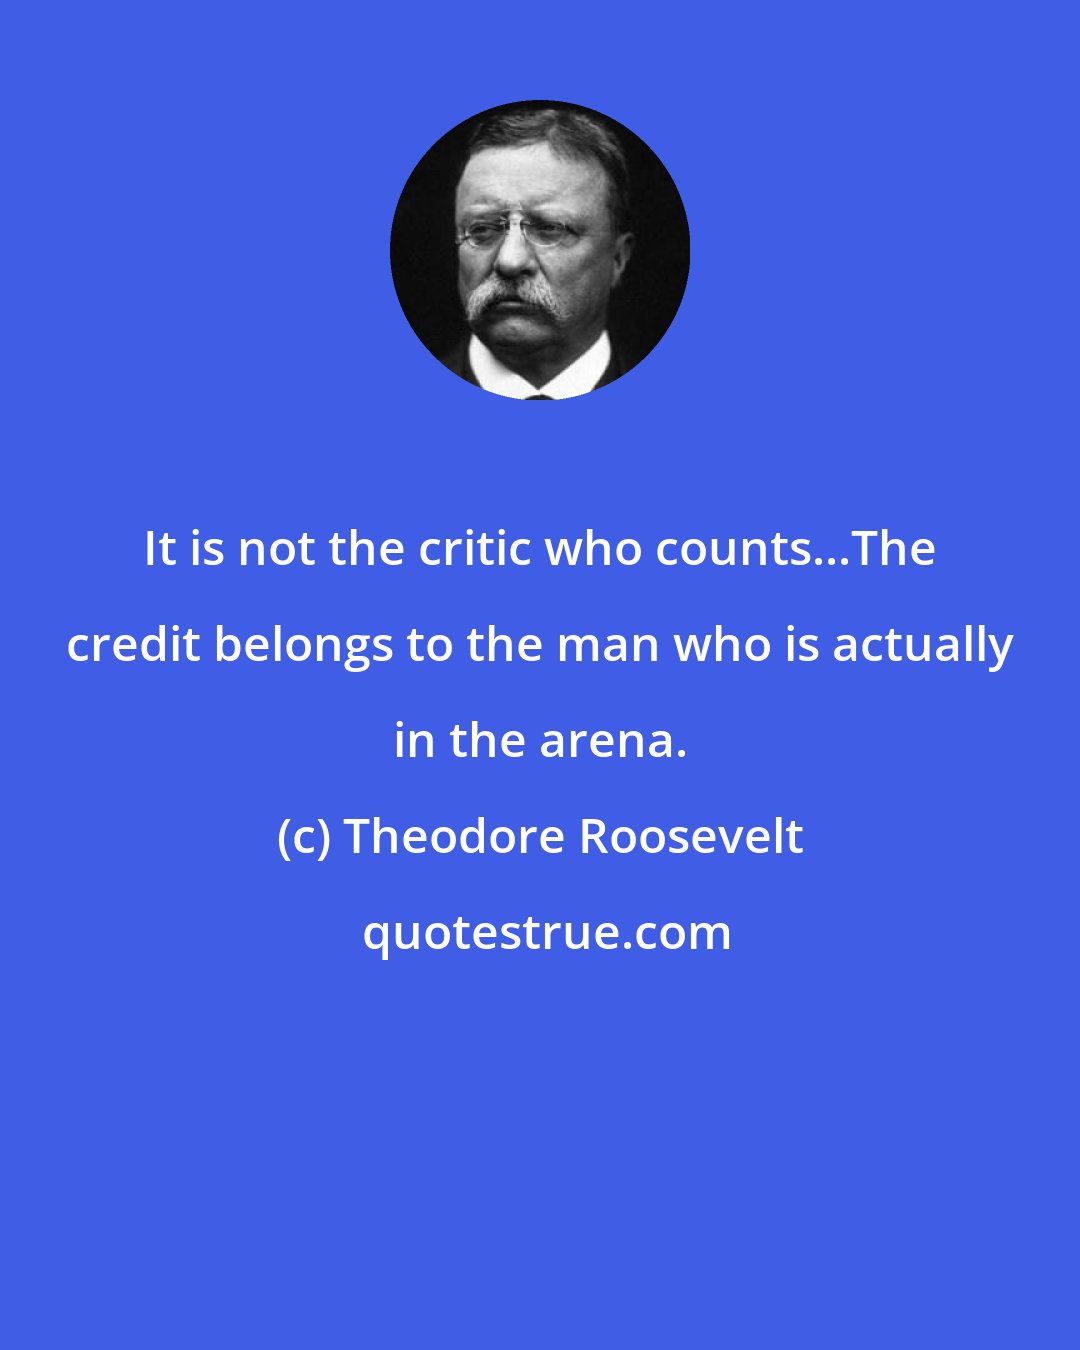 Theodore Roosevelt: It is not the critic who counts...The credit belongs to the man who is actually in the arena.